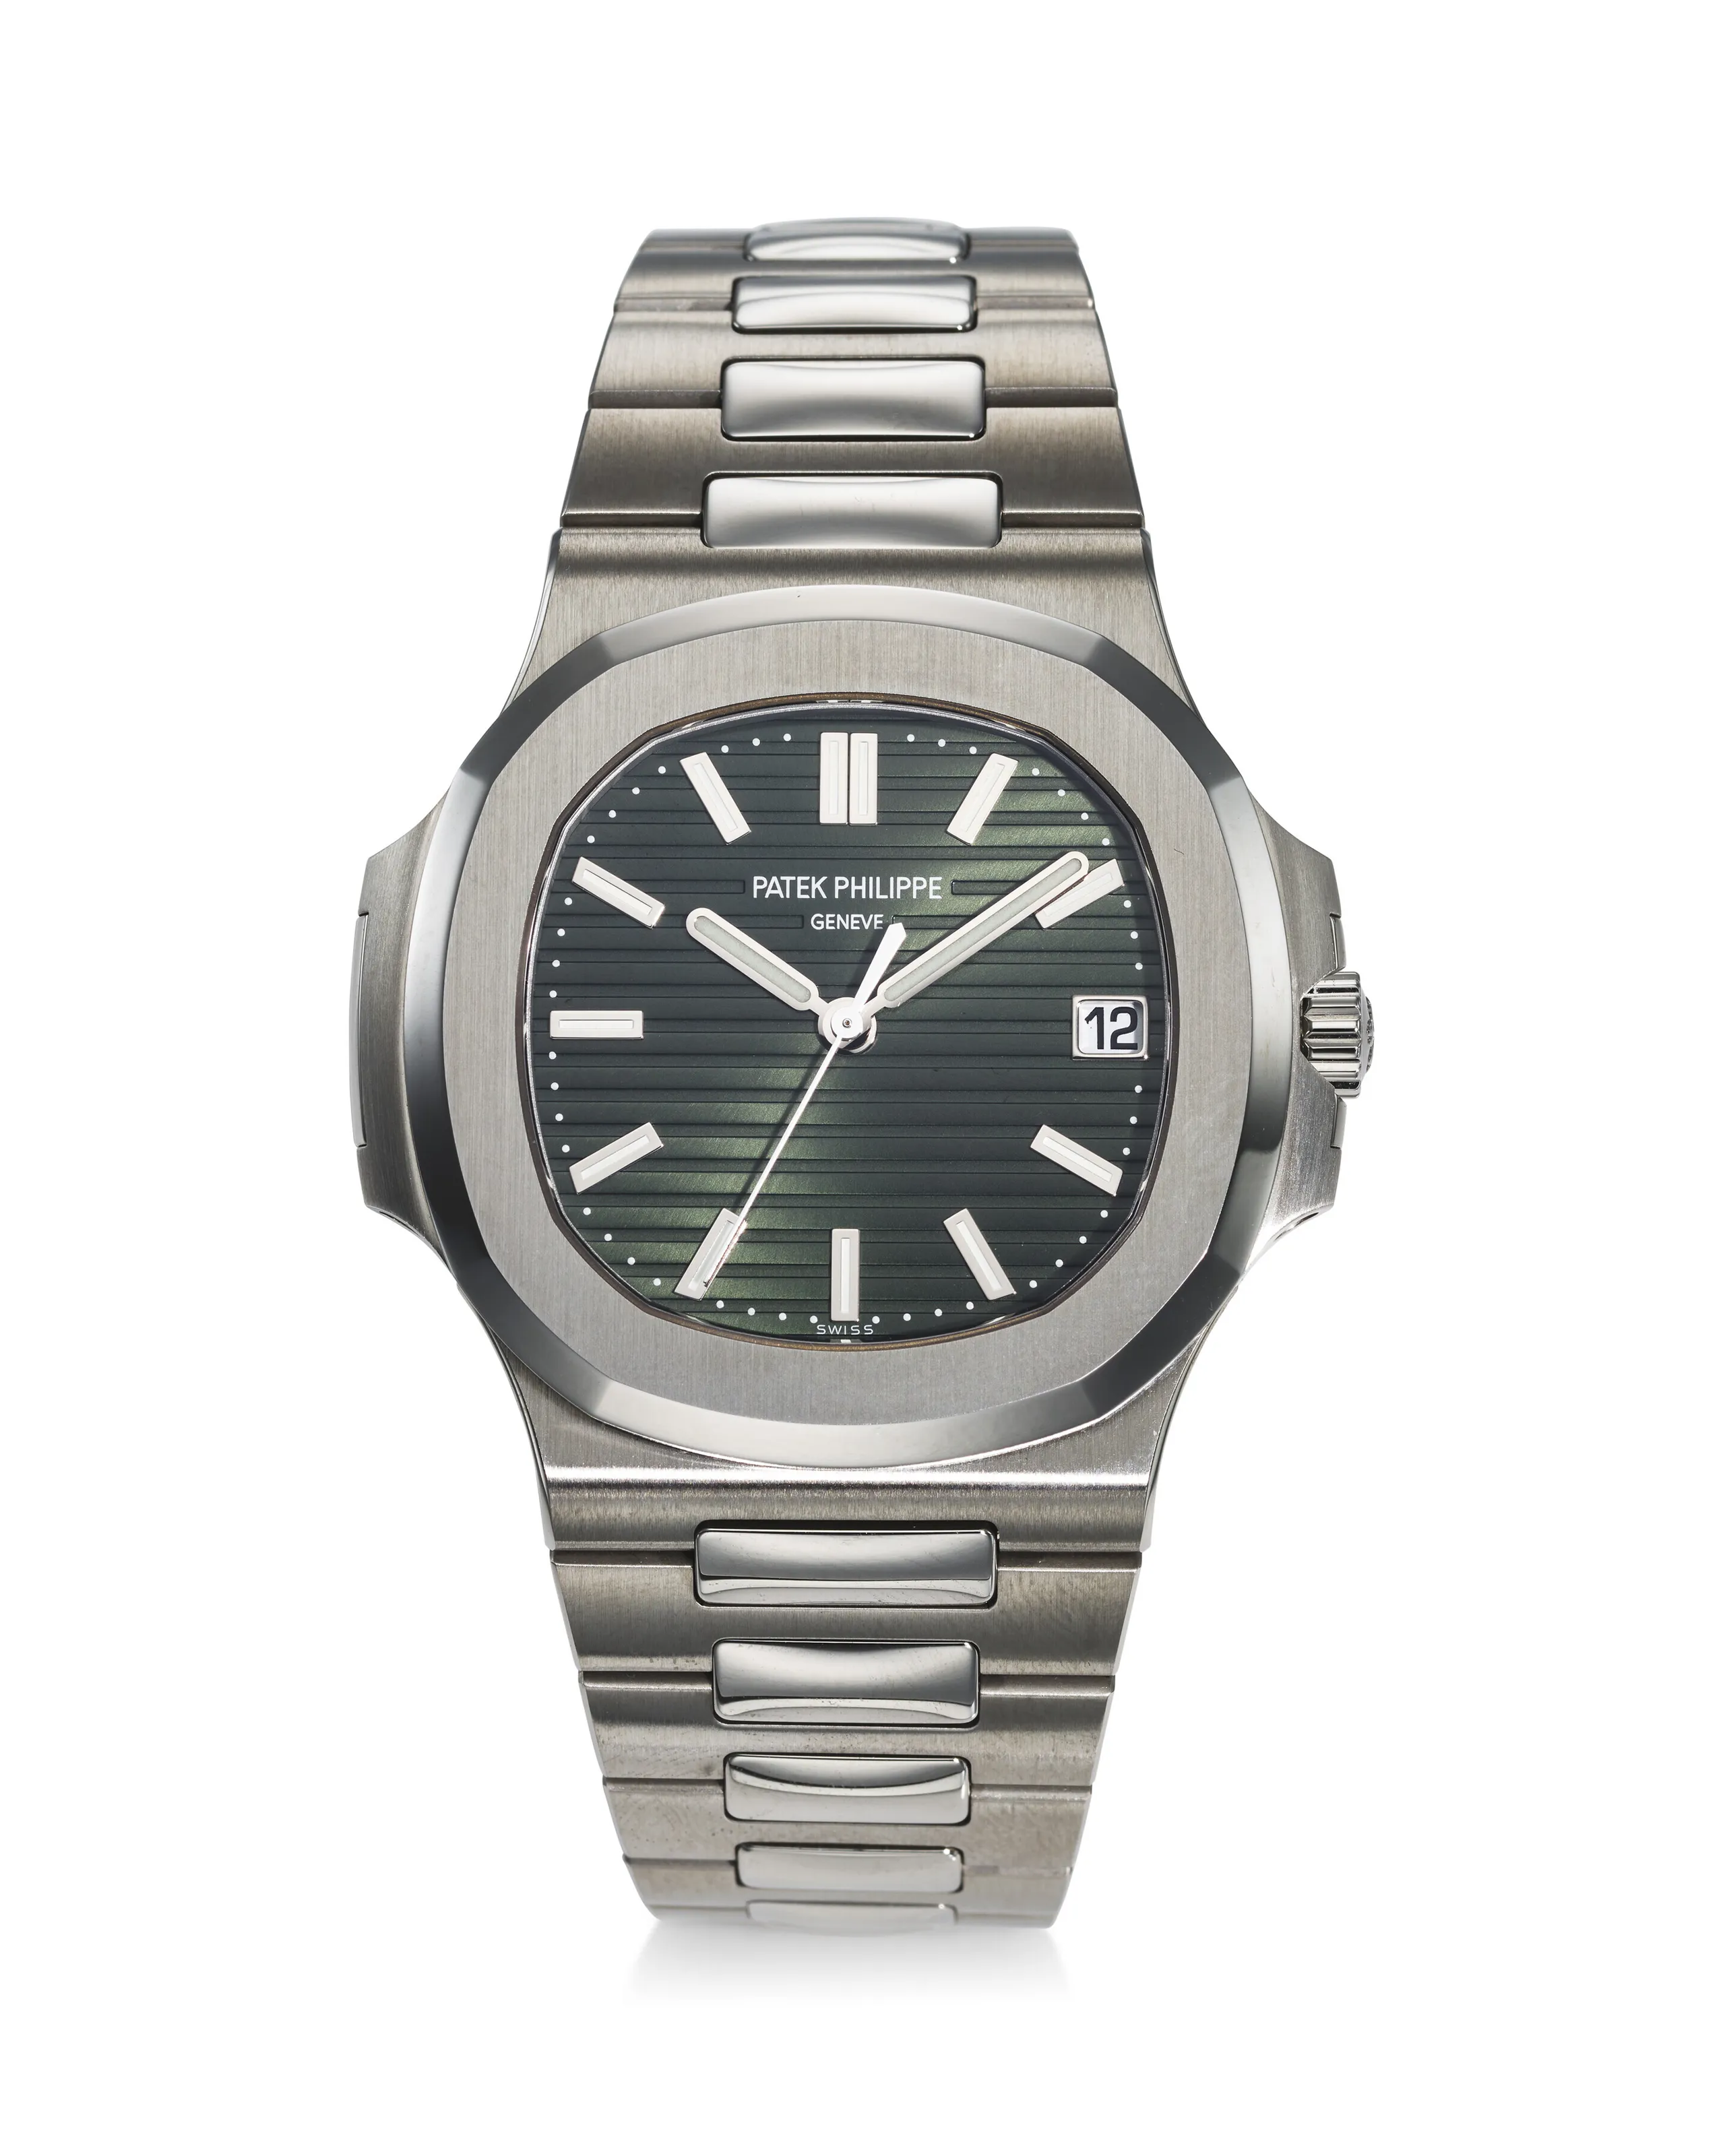 Patek Philippe Nautilus 5711/1A-014 40mm Stainless steel Green